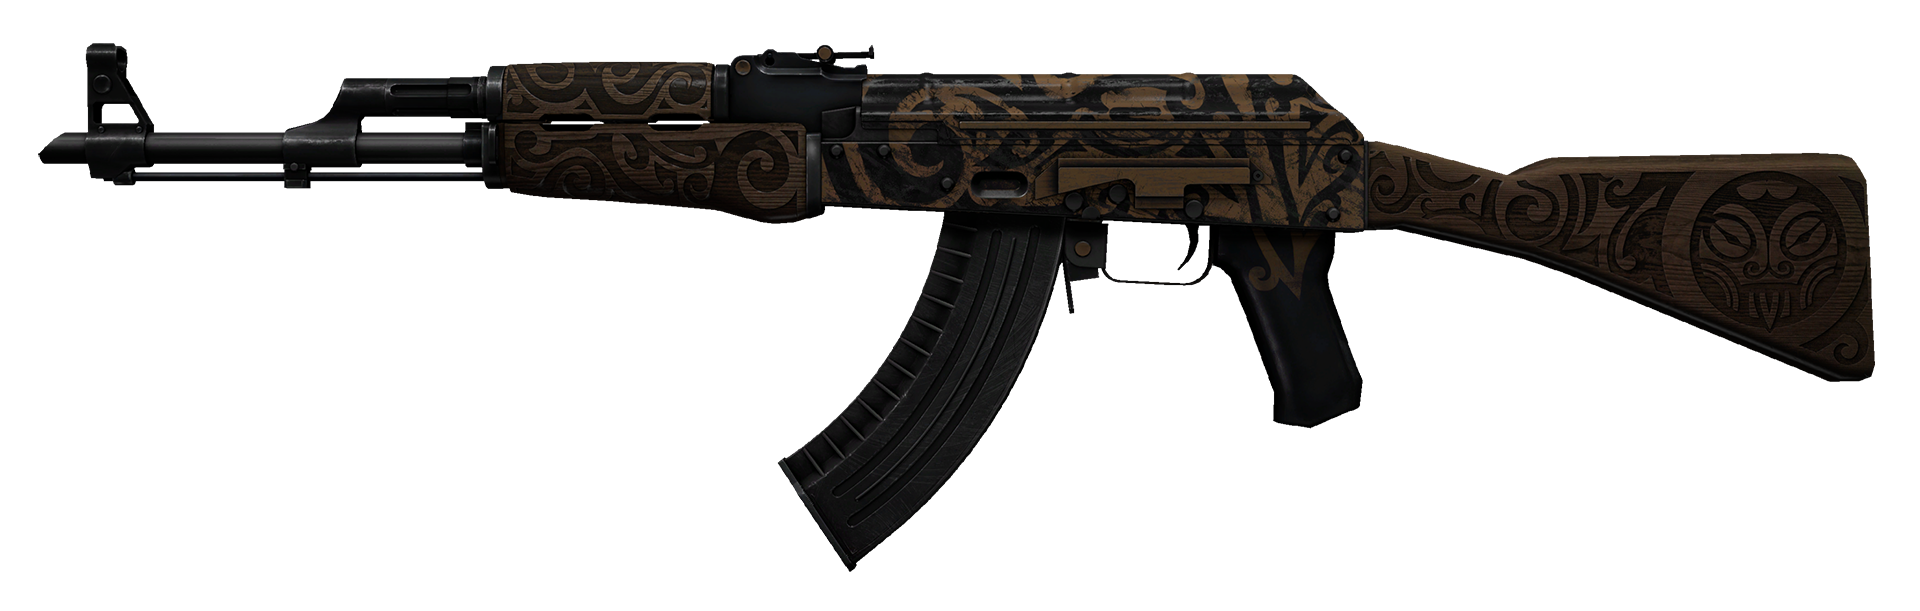 AK-47 Uncharted Large Rendering